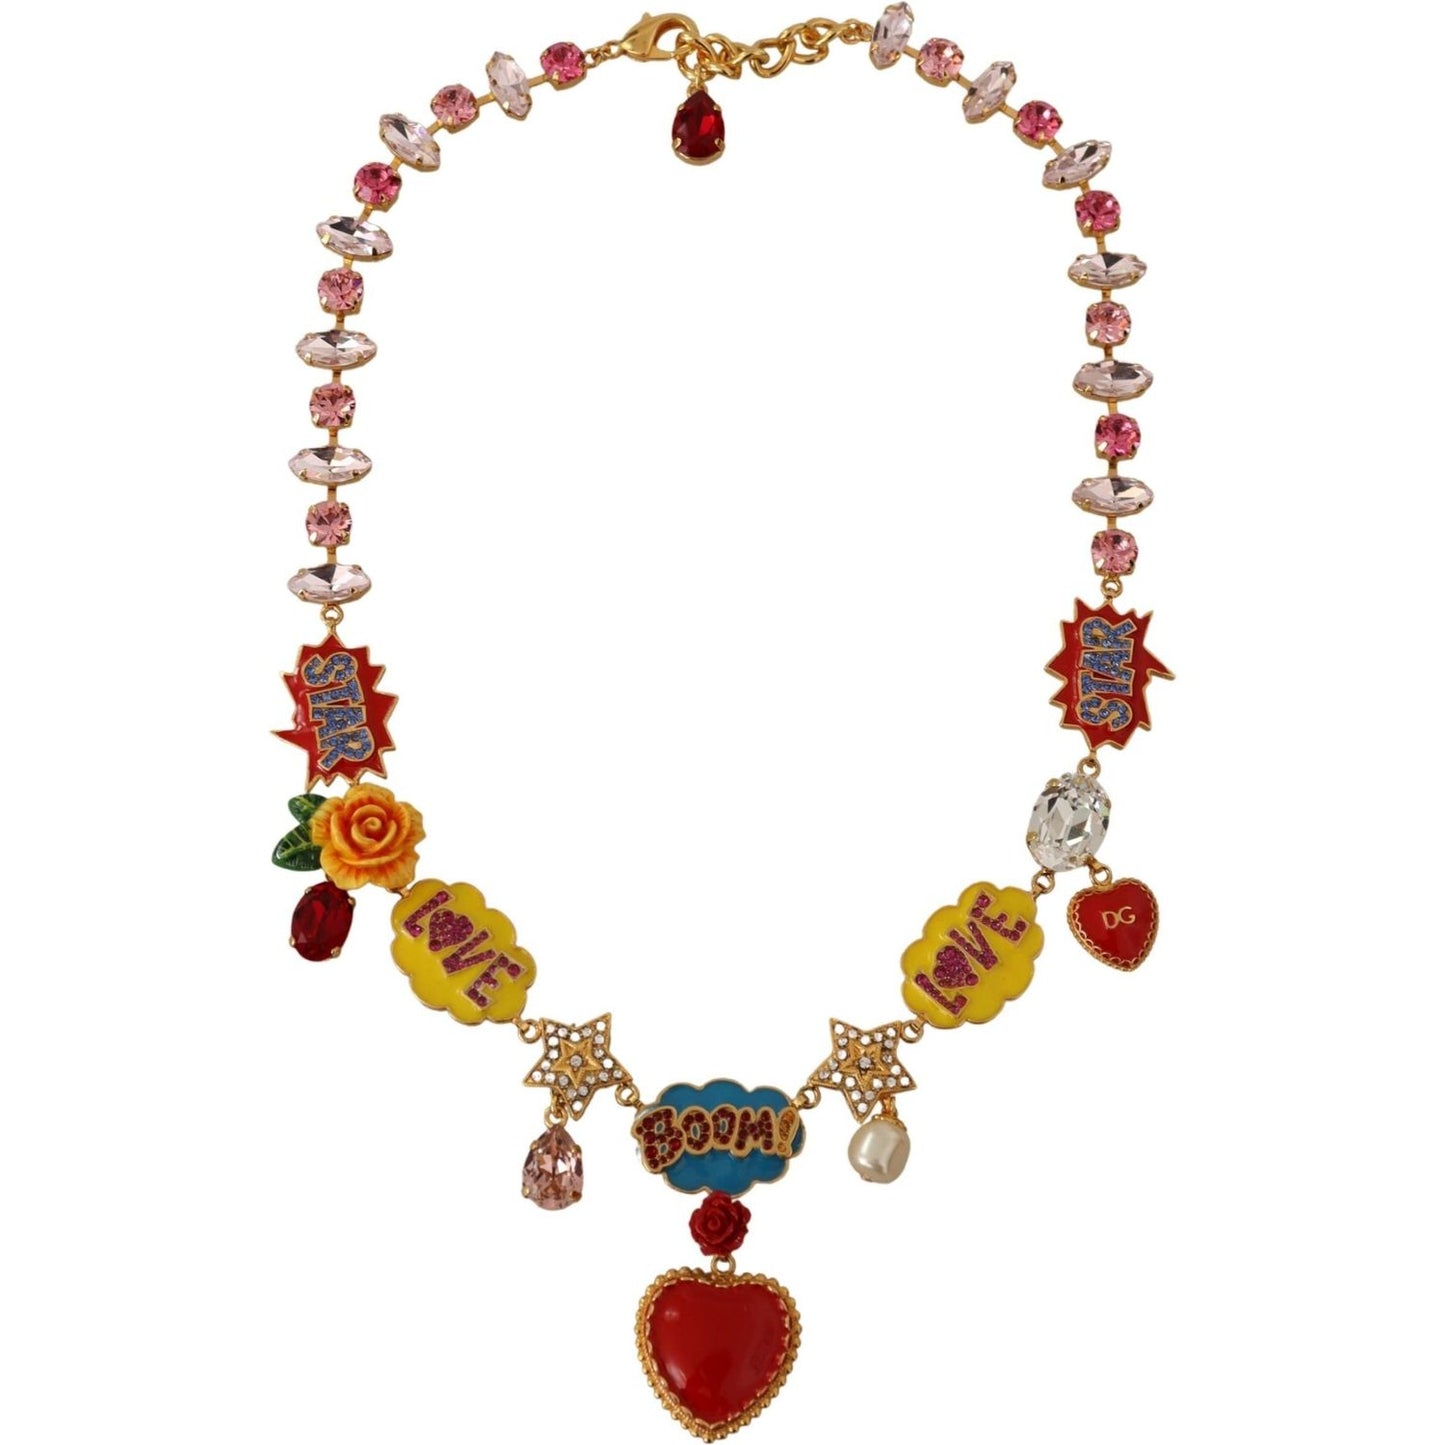 Dolce & Gabbana Chic Fumetti Cartoons Statement Necklace gold-cartoon-love-star-boom-crystals-chain-necklace-1 IMG_6878-scaled-34a5c6ac-e4e.jpg